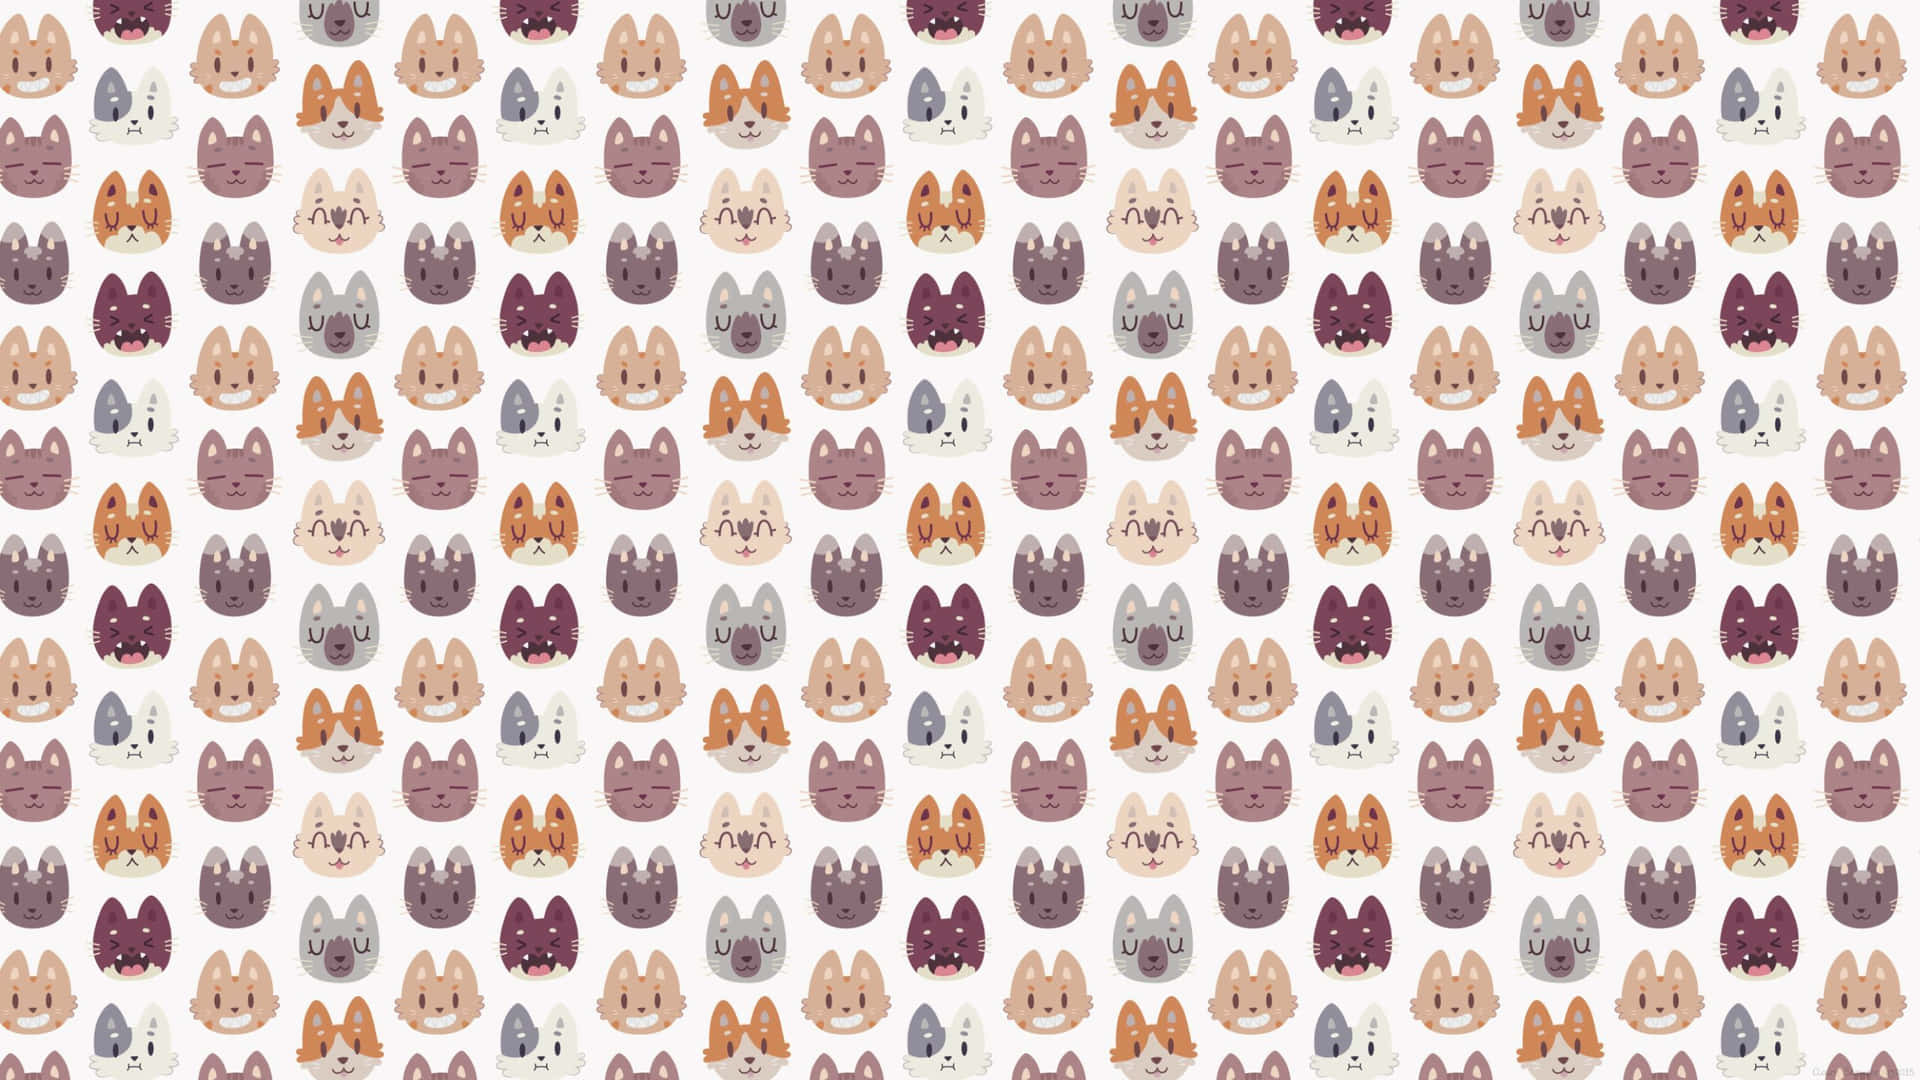 Look at this adorable cat pattern. Wallpaper